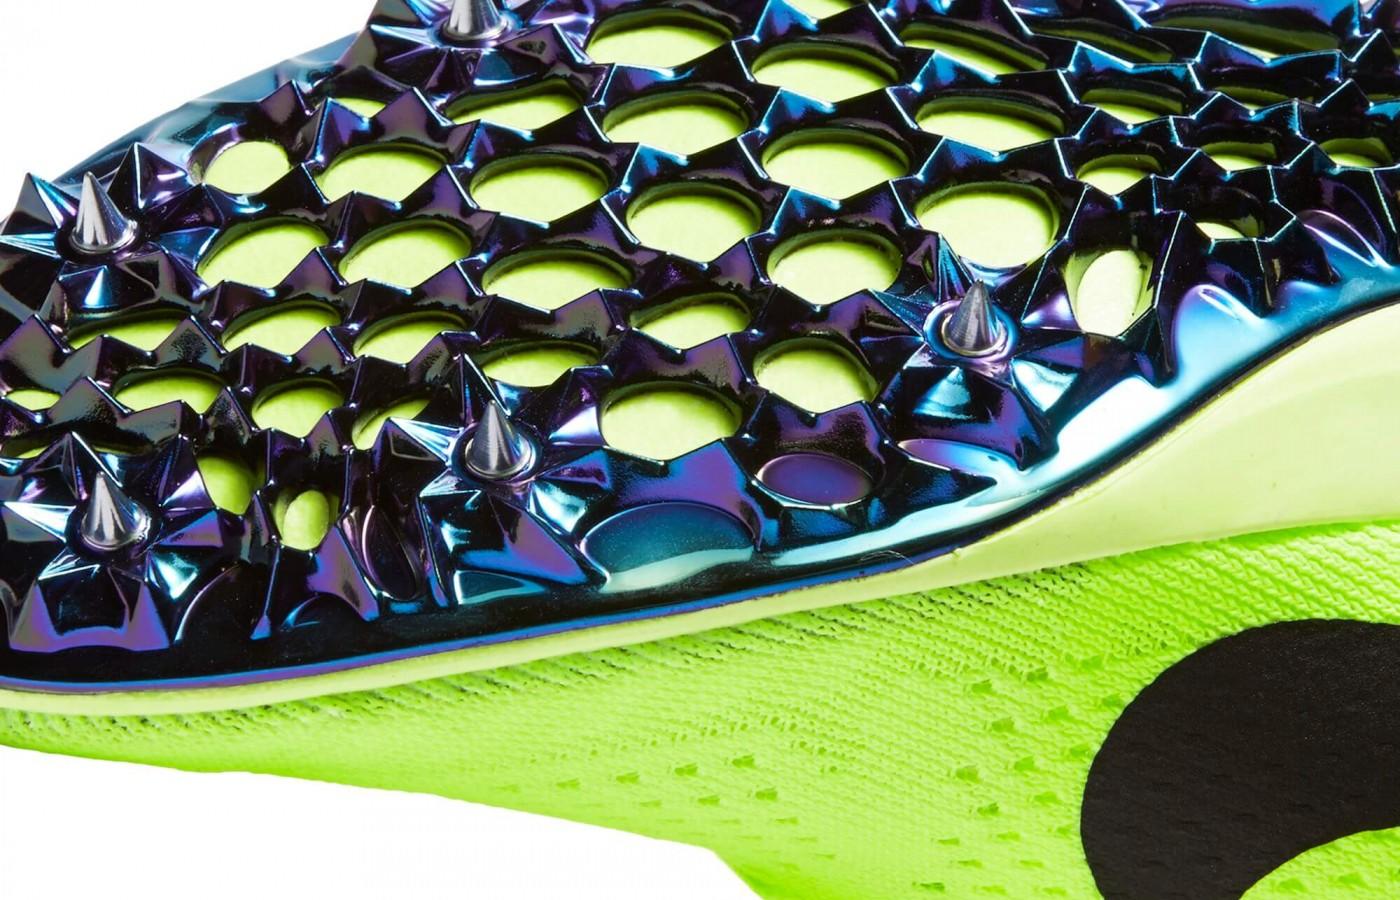 Nike Zoom Victory Elite 2 features a 3/4-inch spike plate 